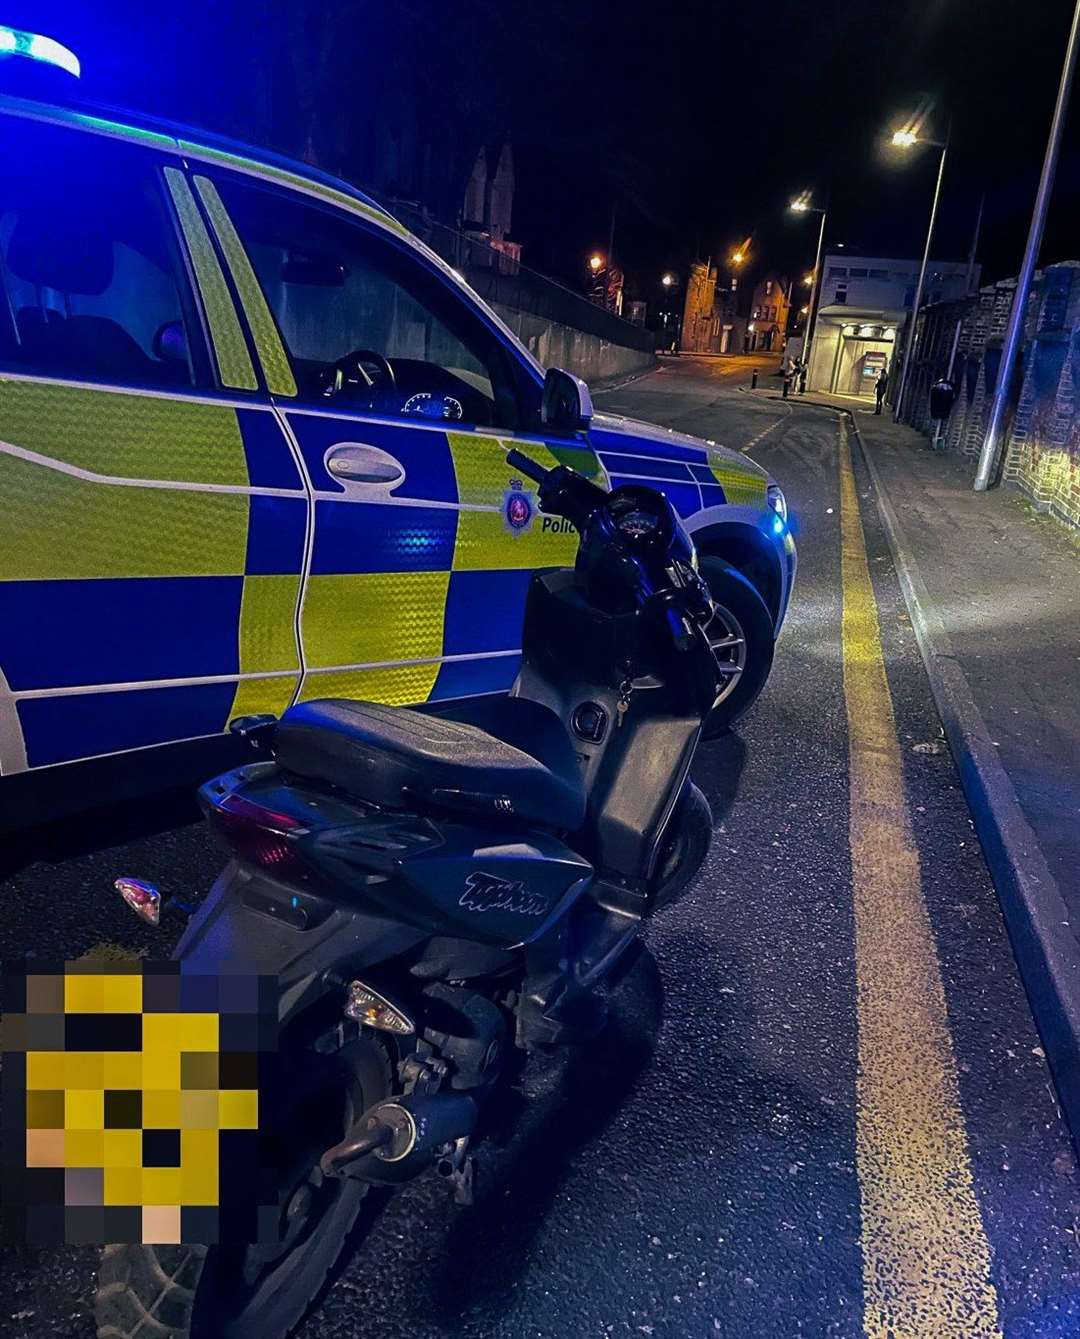 The moped stopped by police. Picture: @KentPoliceRoads